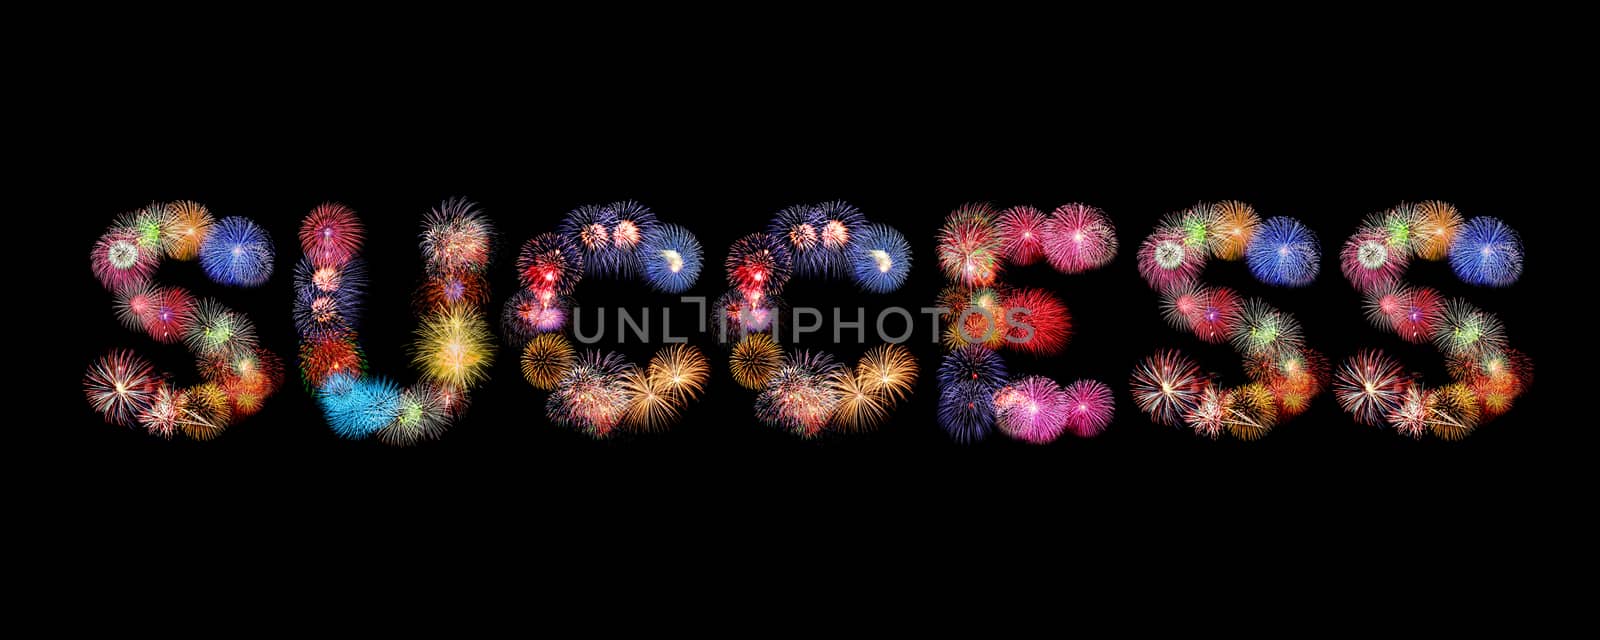 Success word colorful fireworks text isolated on black background